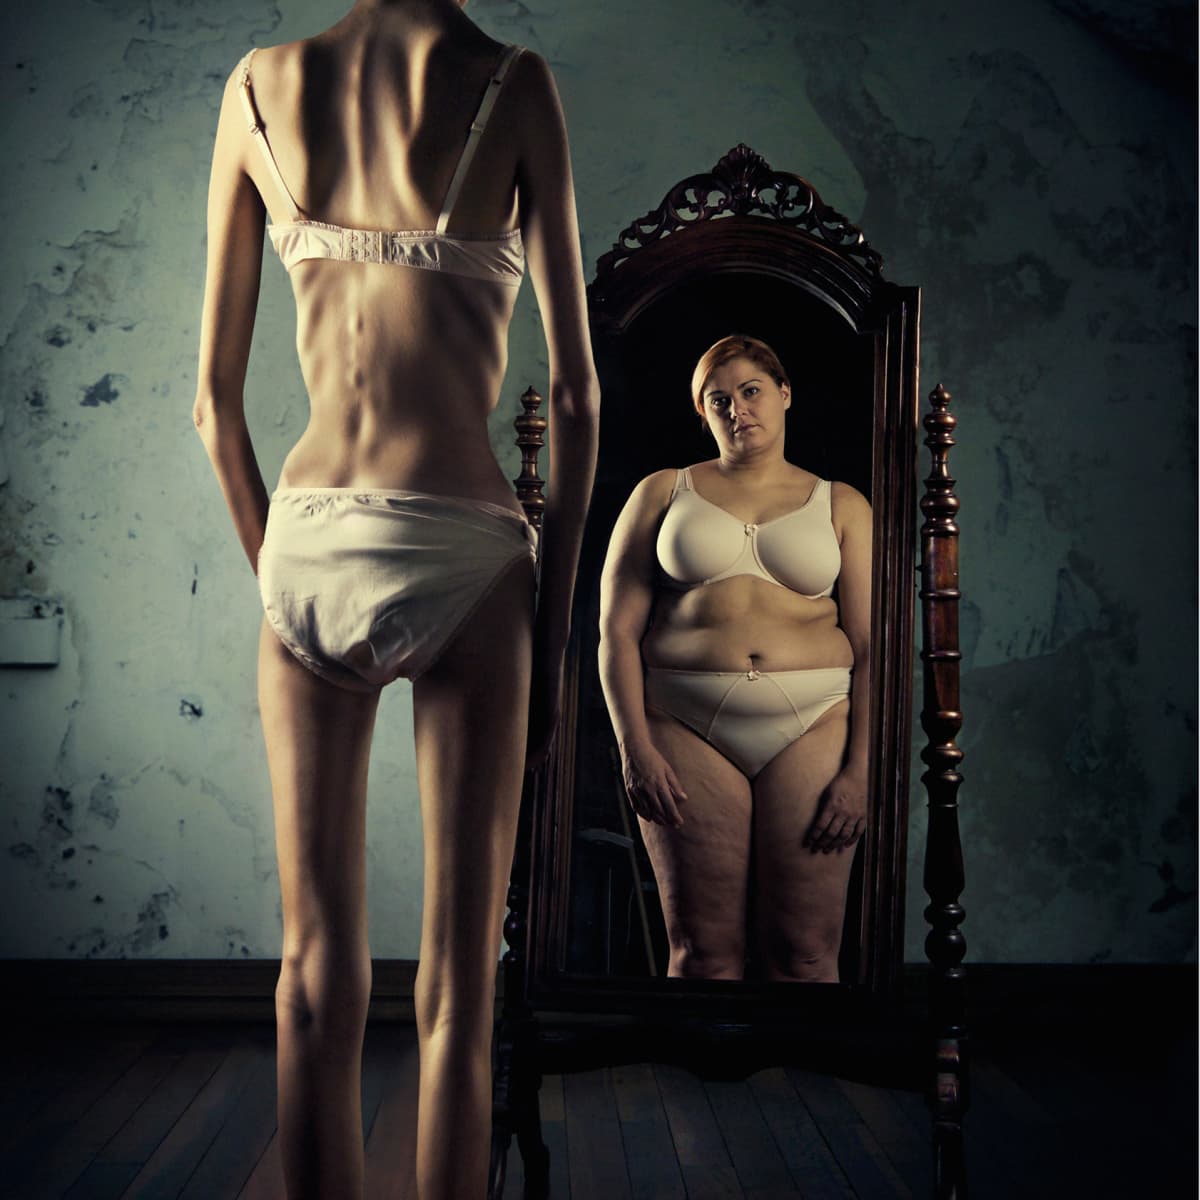 an insight into anorexia nervosa